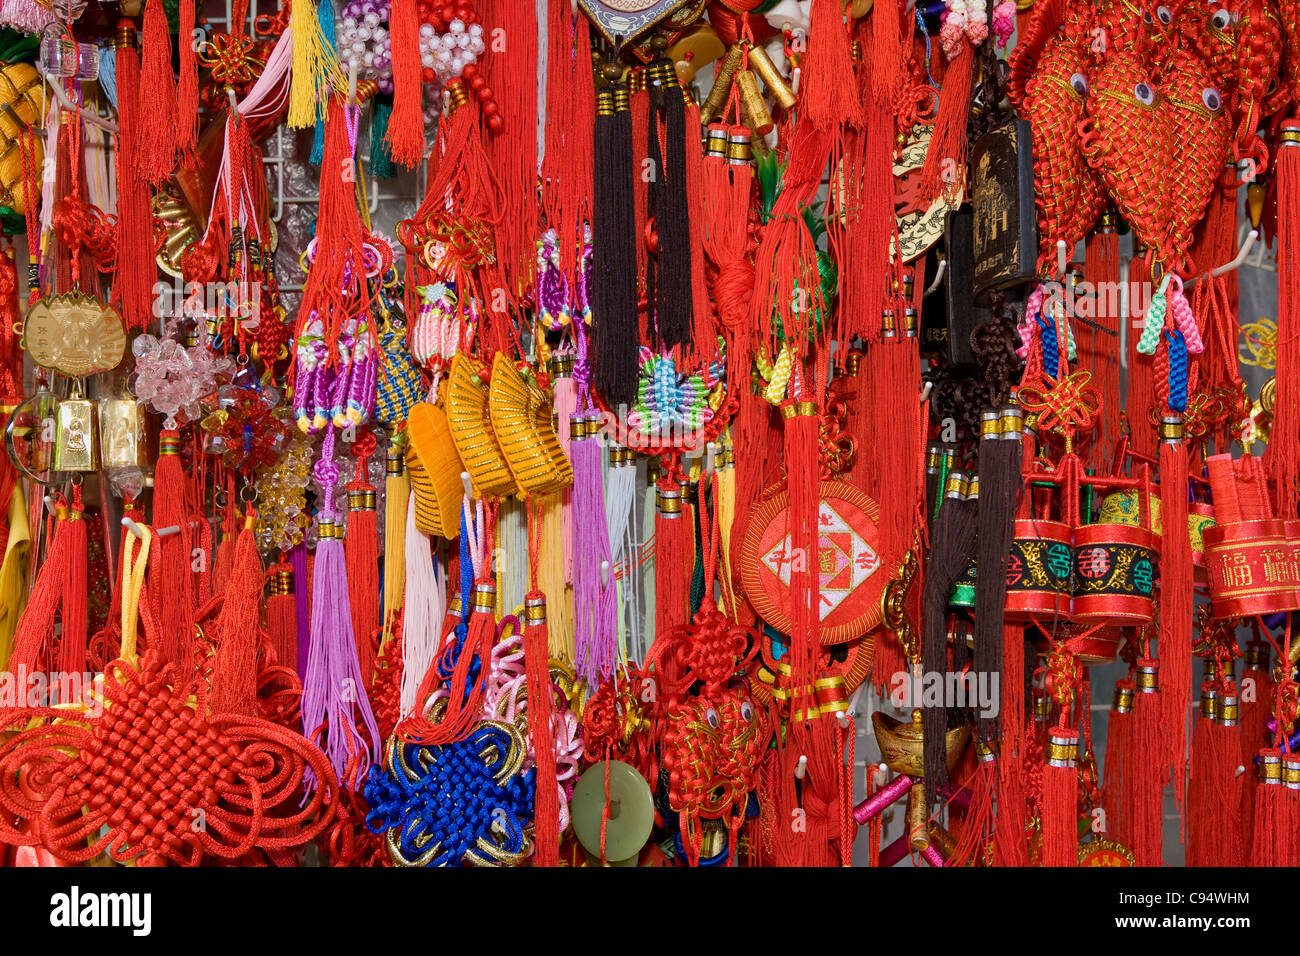 Cheap Souvenirs High Resolution Stock Photography and Images - Alamy